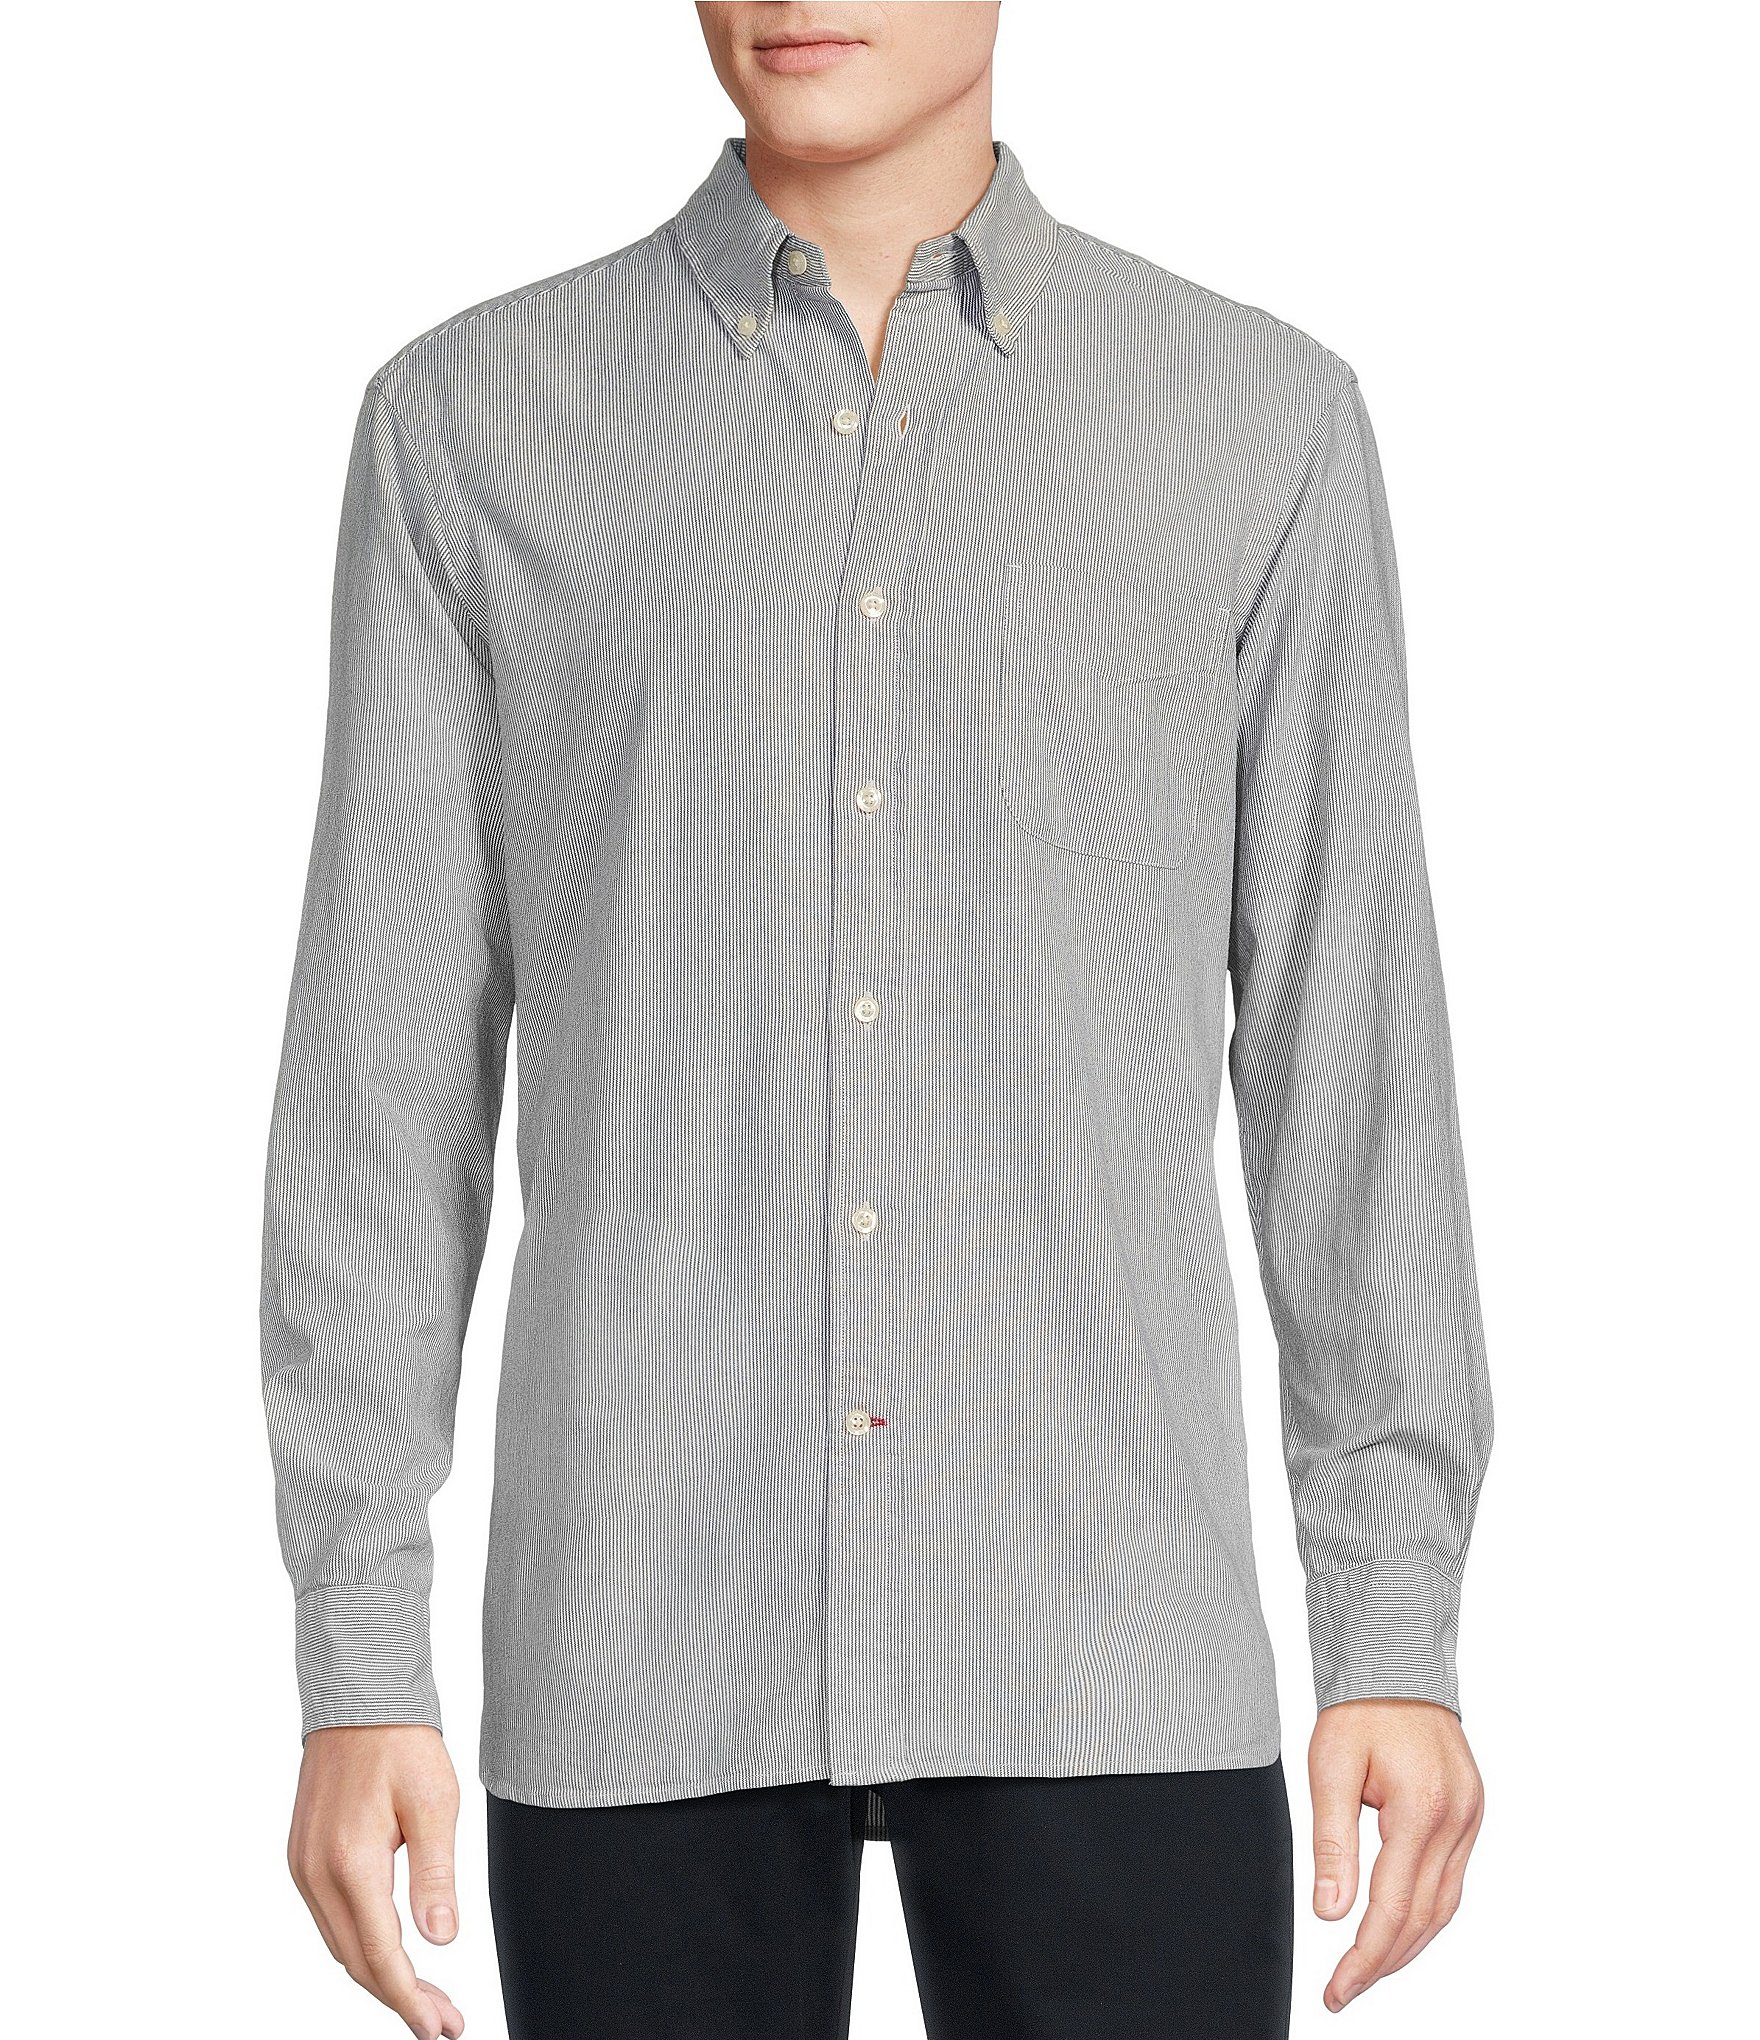 Lucky Brand Long Sleeve Plaid Brushed Knit Shirt